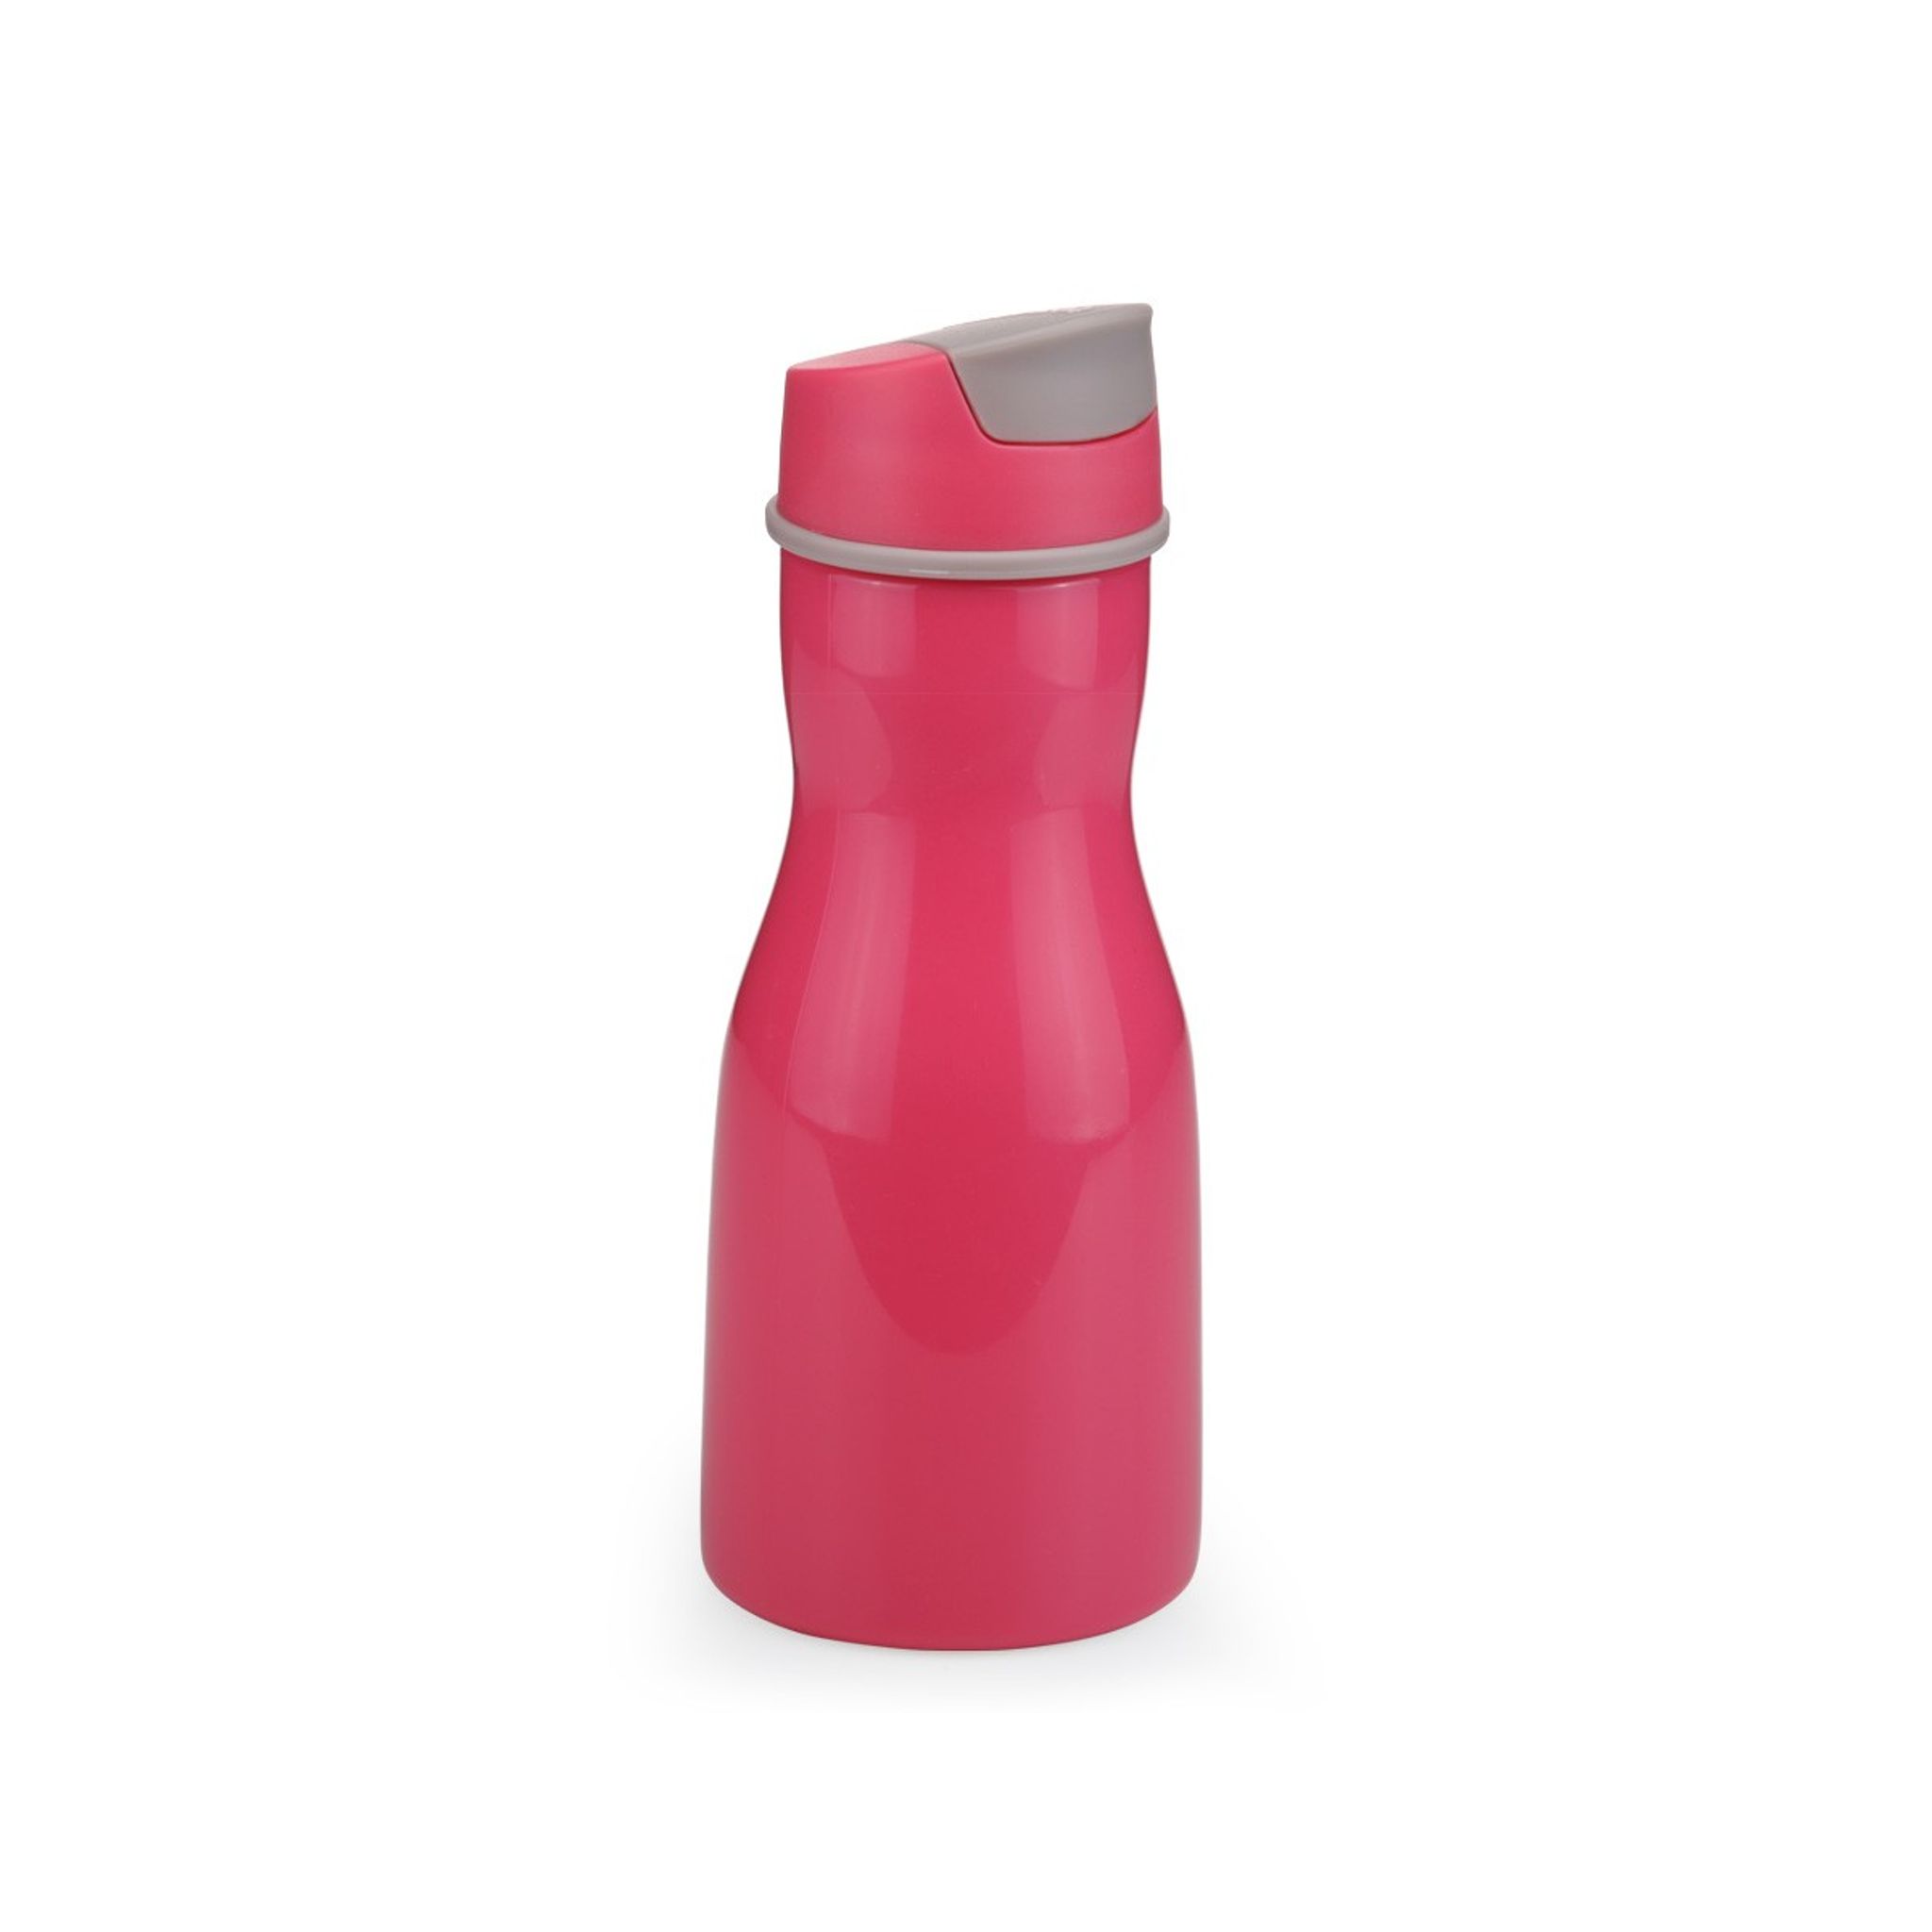 Bottle for drinks PURITY 0.5 l, pink